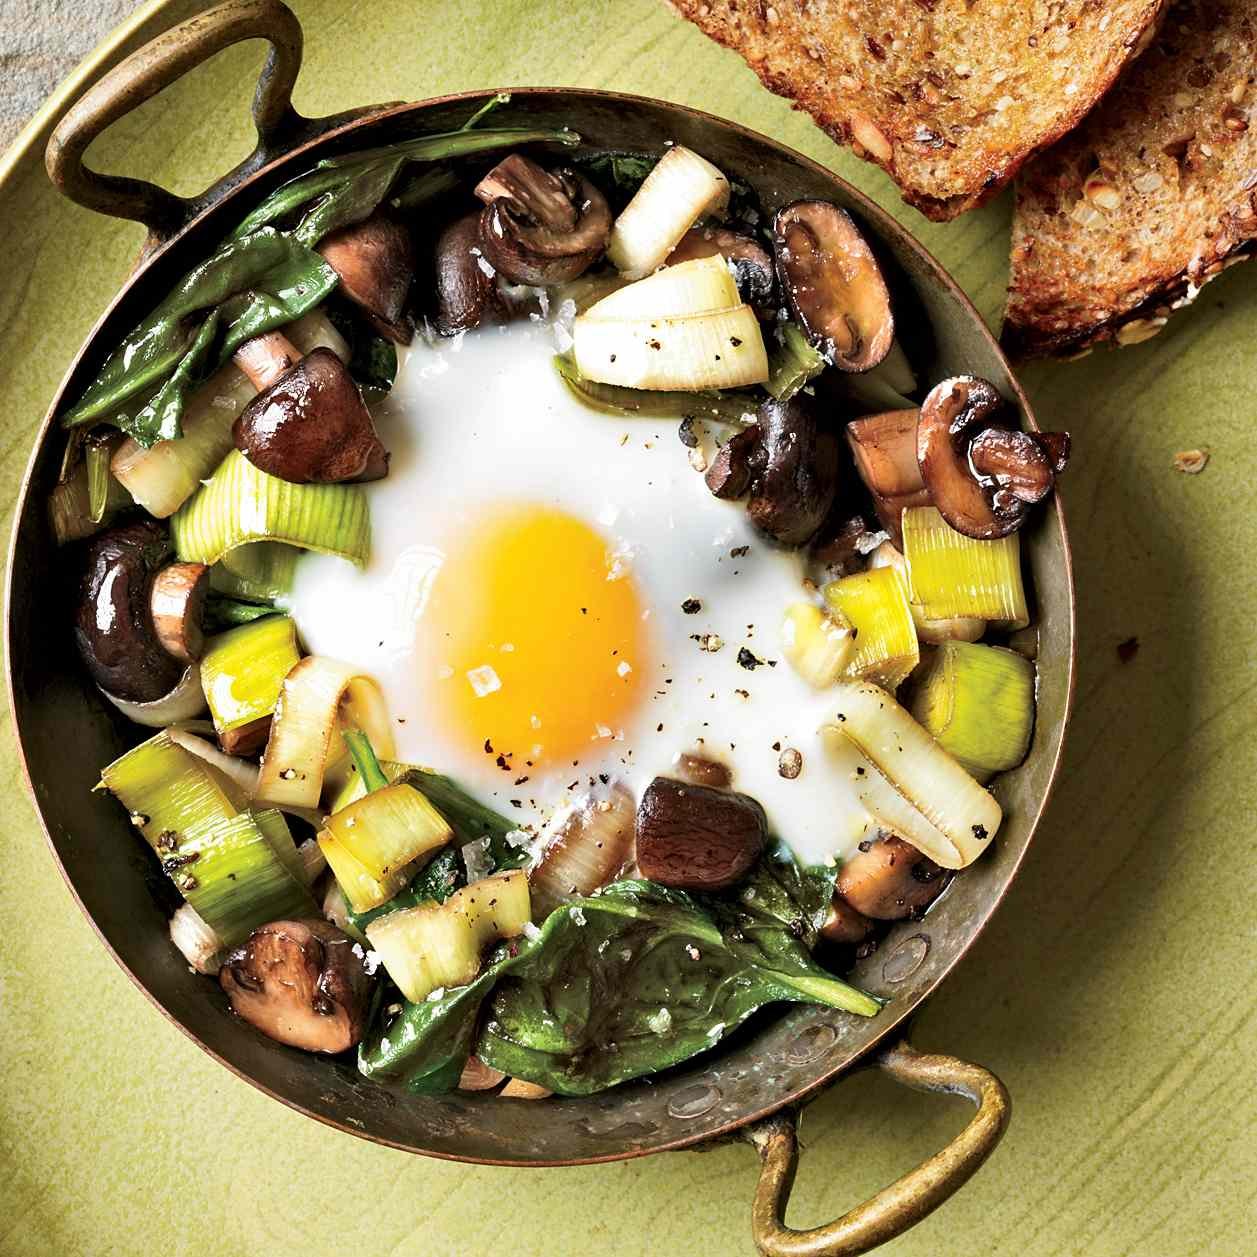 Eggs Baked Over Sautéed Mushrooms and Spinach